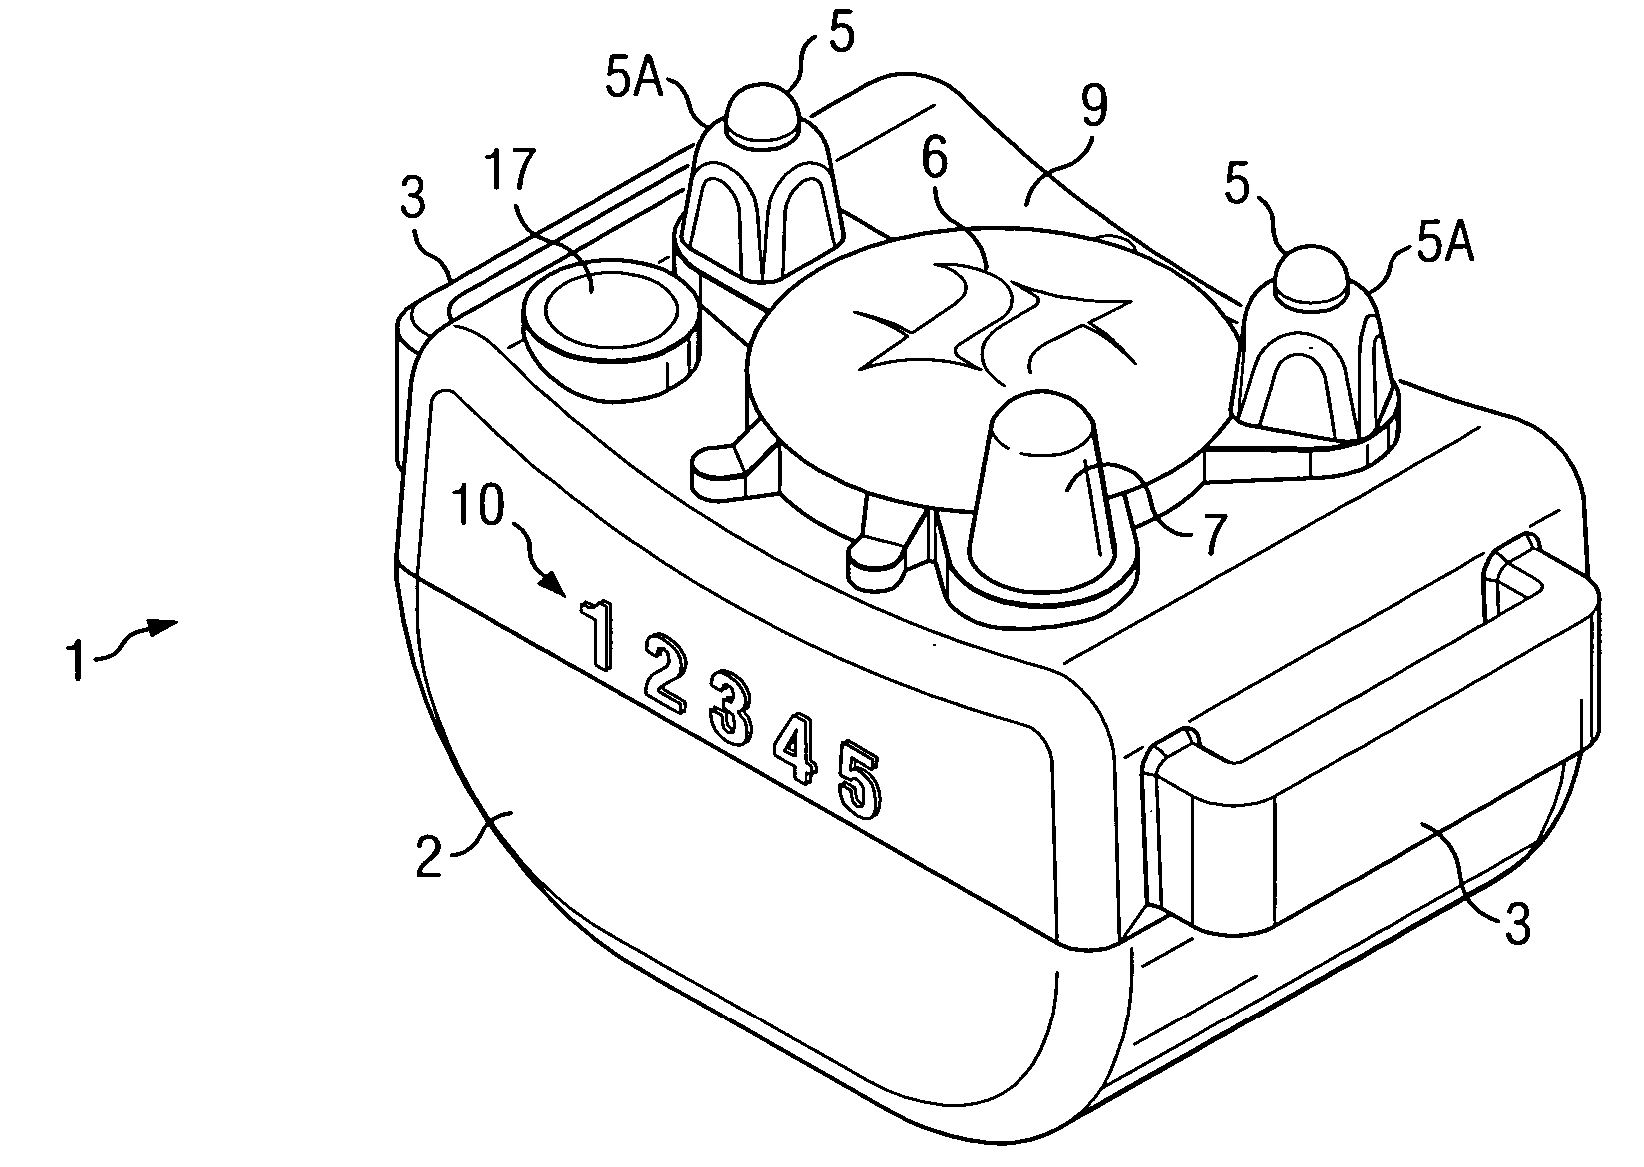 Barking episode counter and method for bark control device